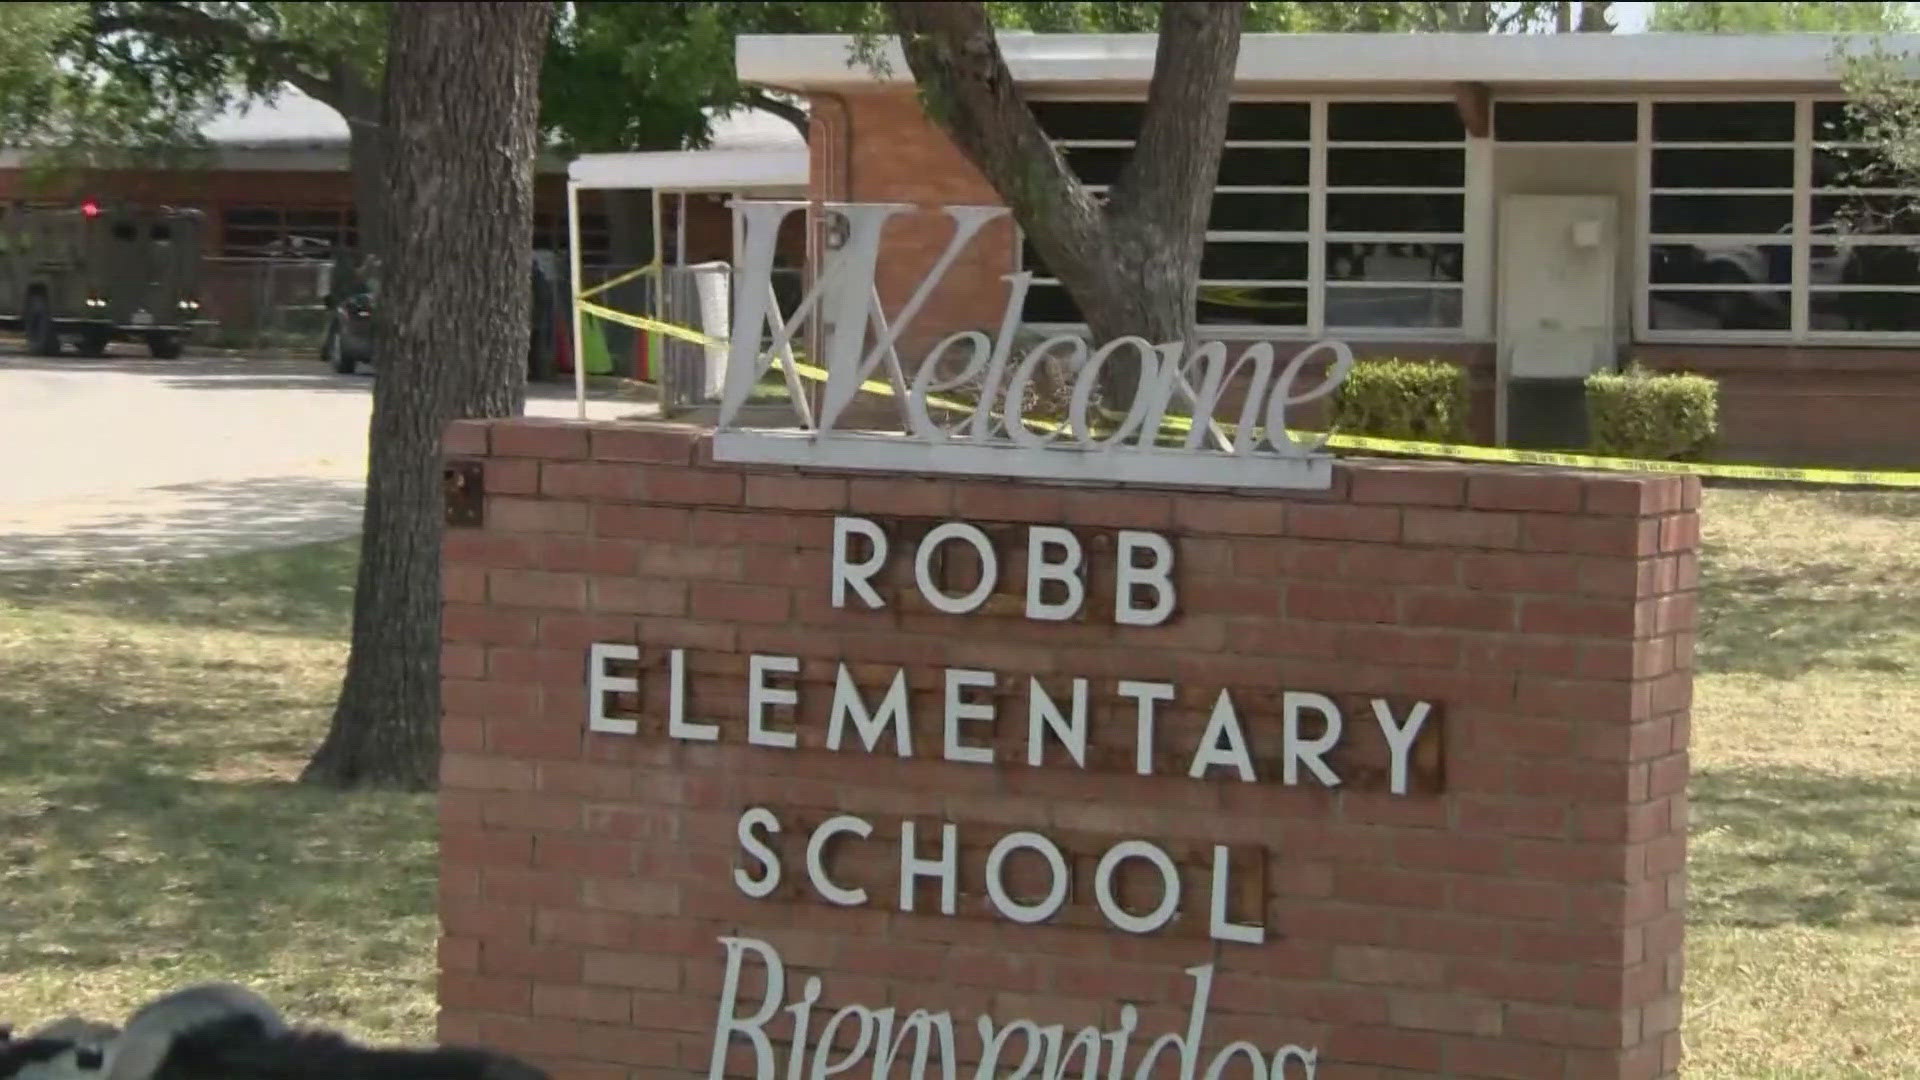 The U.S. Justice Department is stepping in to help the Uvalde Police Department make improvements, more than two years after the mass shooting at Robb Elementary.